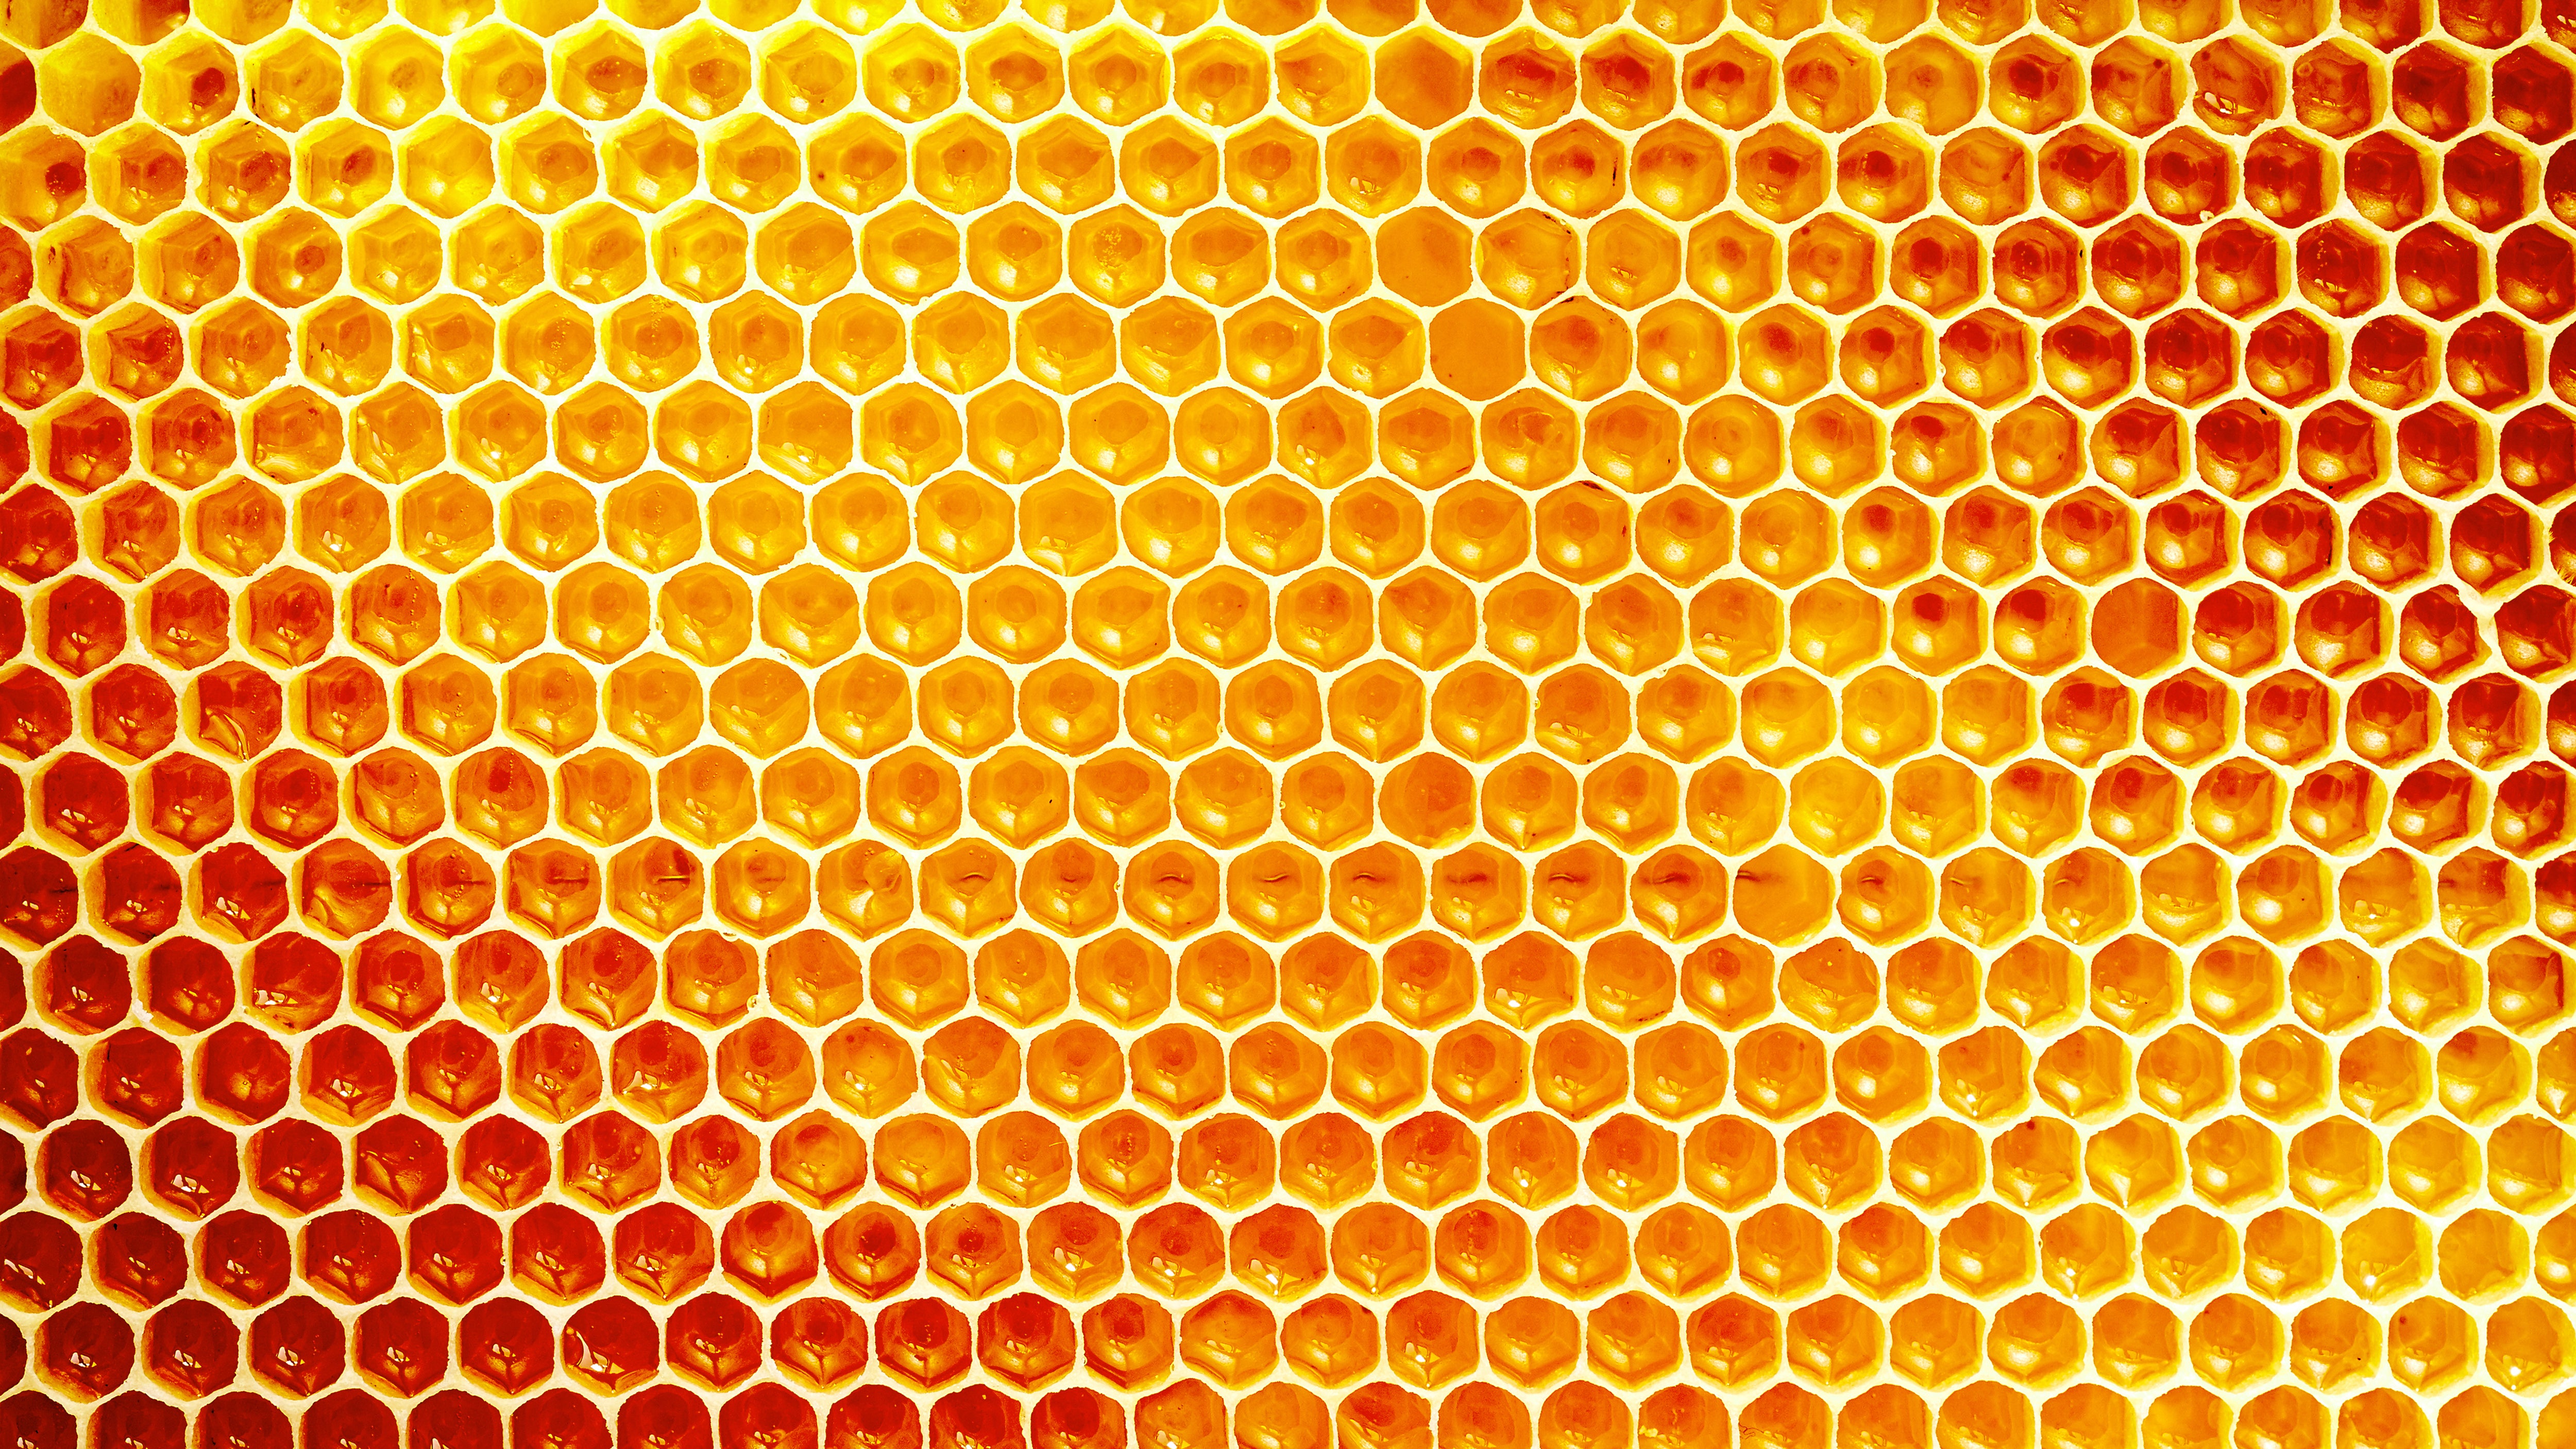 Minding Your Beeswax.